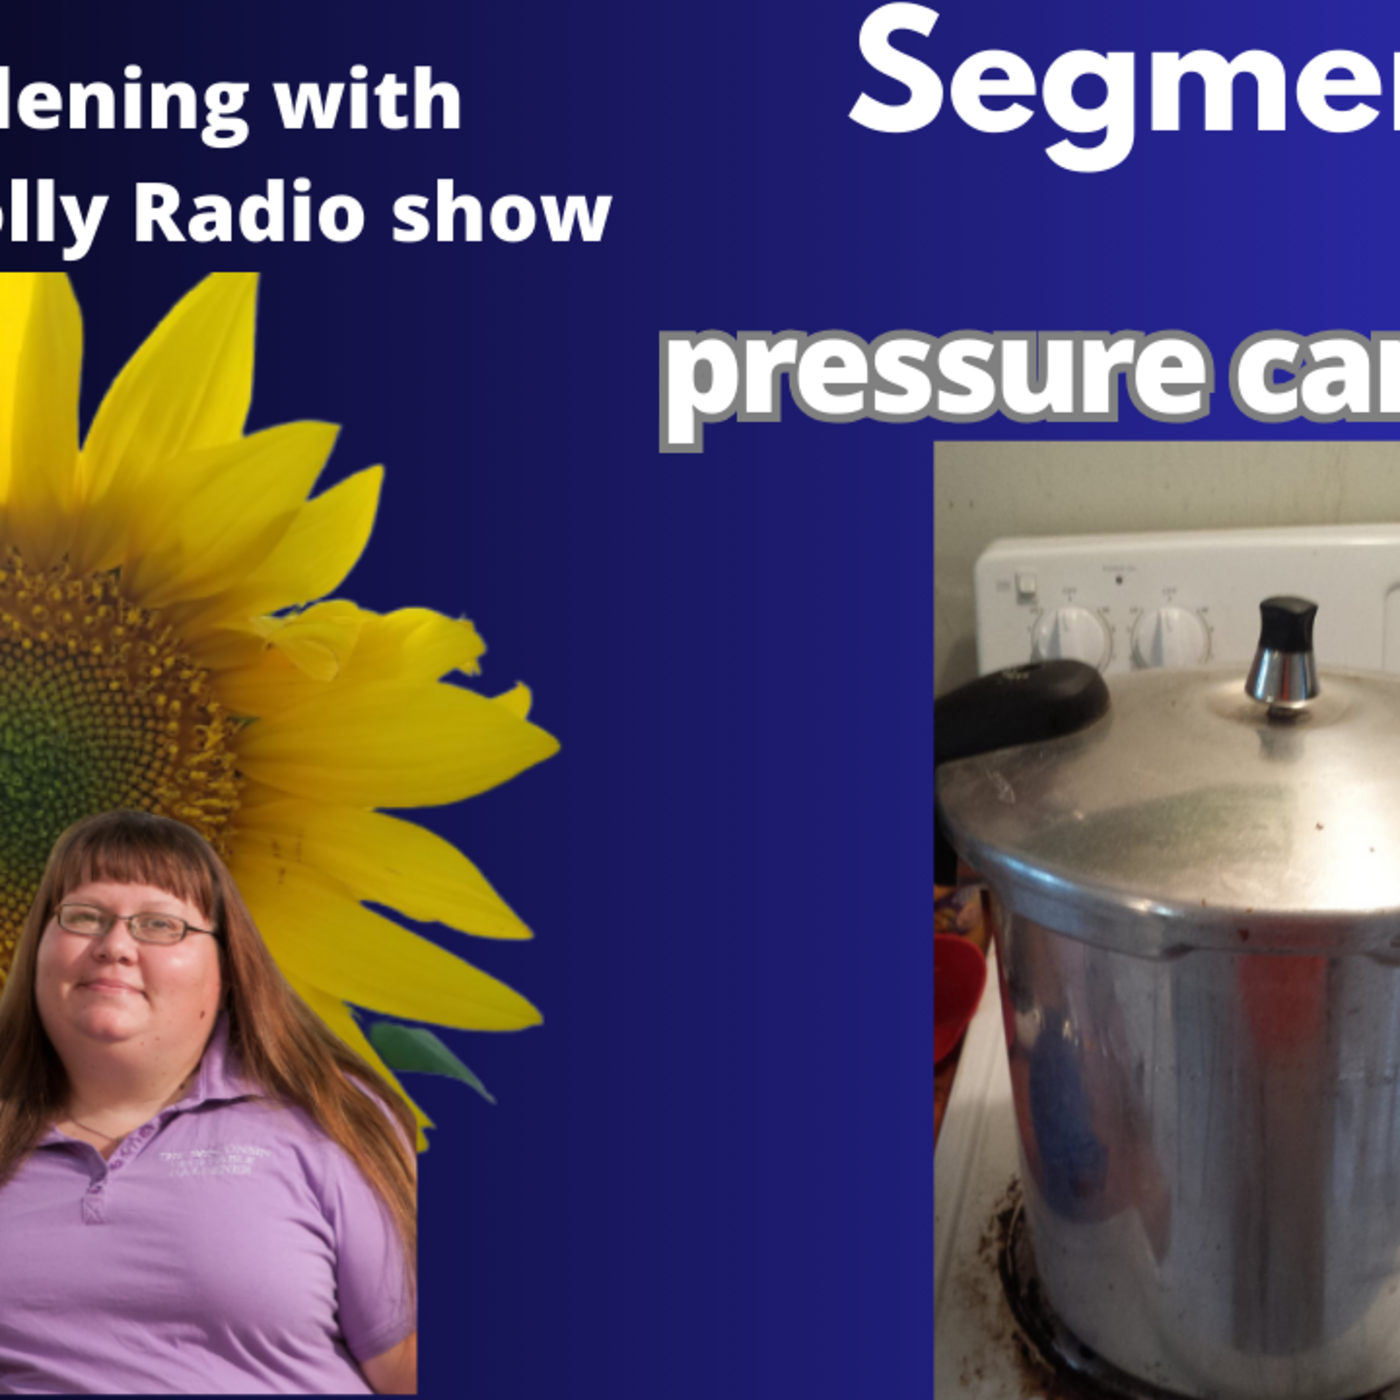 Episode 1223: Seg 2 of S8E14 knowing pressure canning before you start canning - The Gardening with Joey and Holly Radio Show